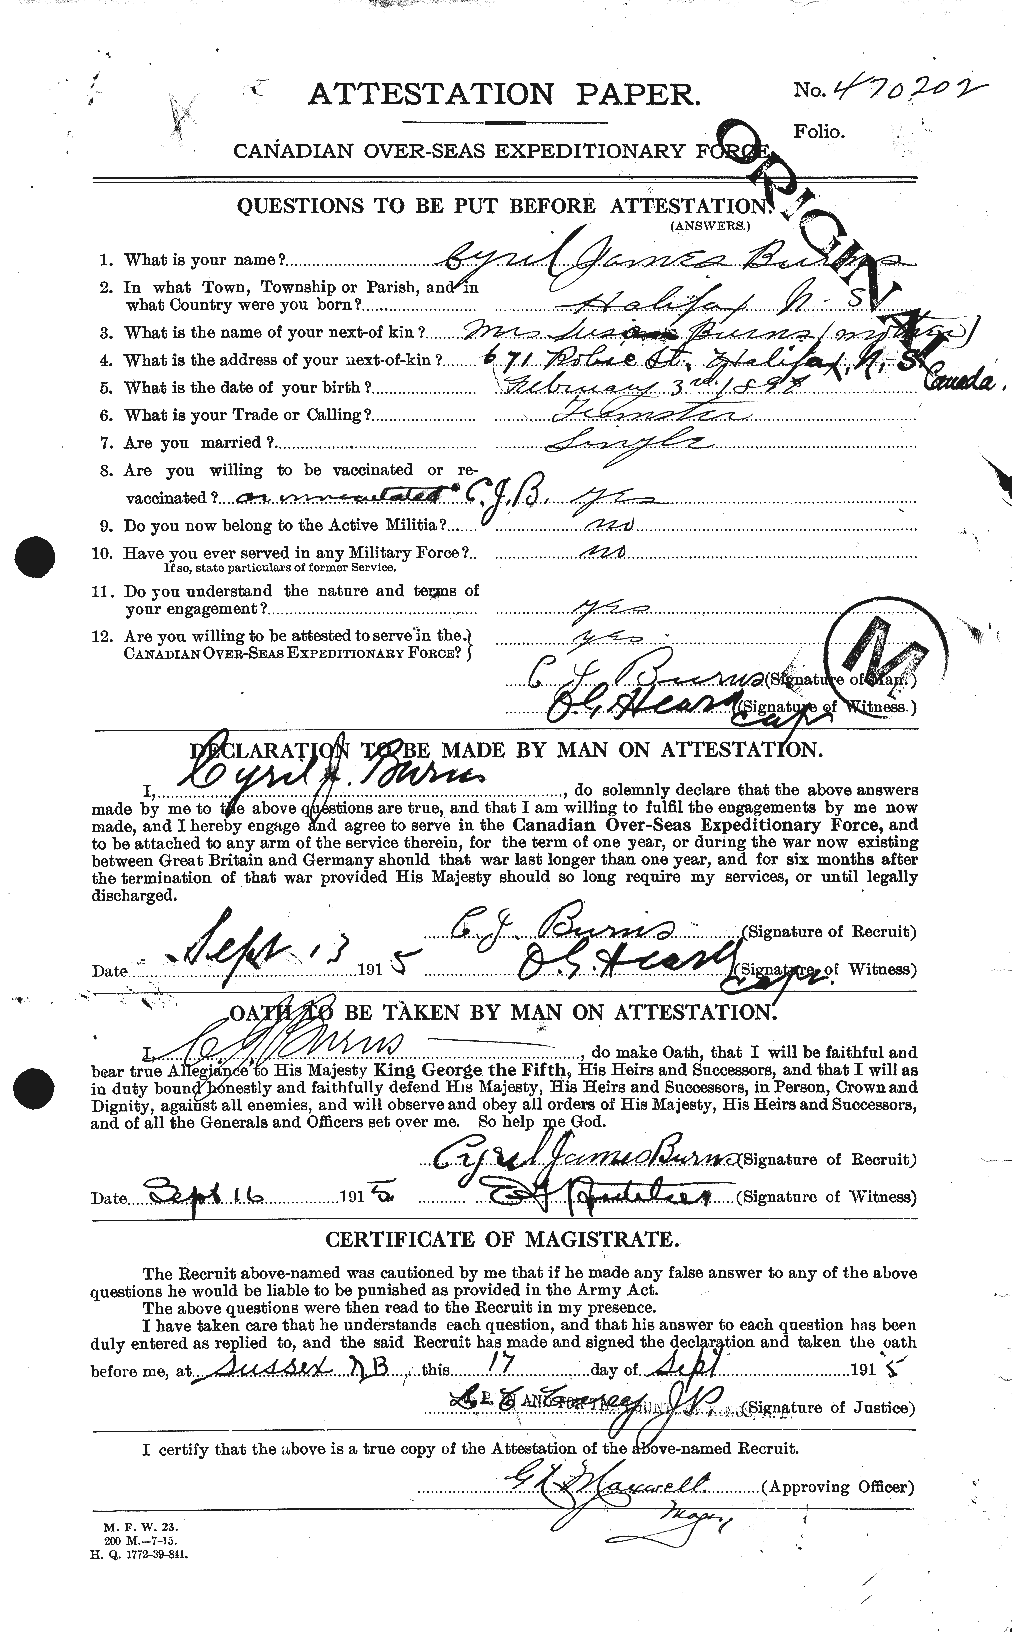 Personnel Records of the First World War - CEF 274042a